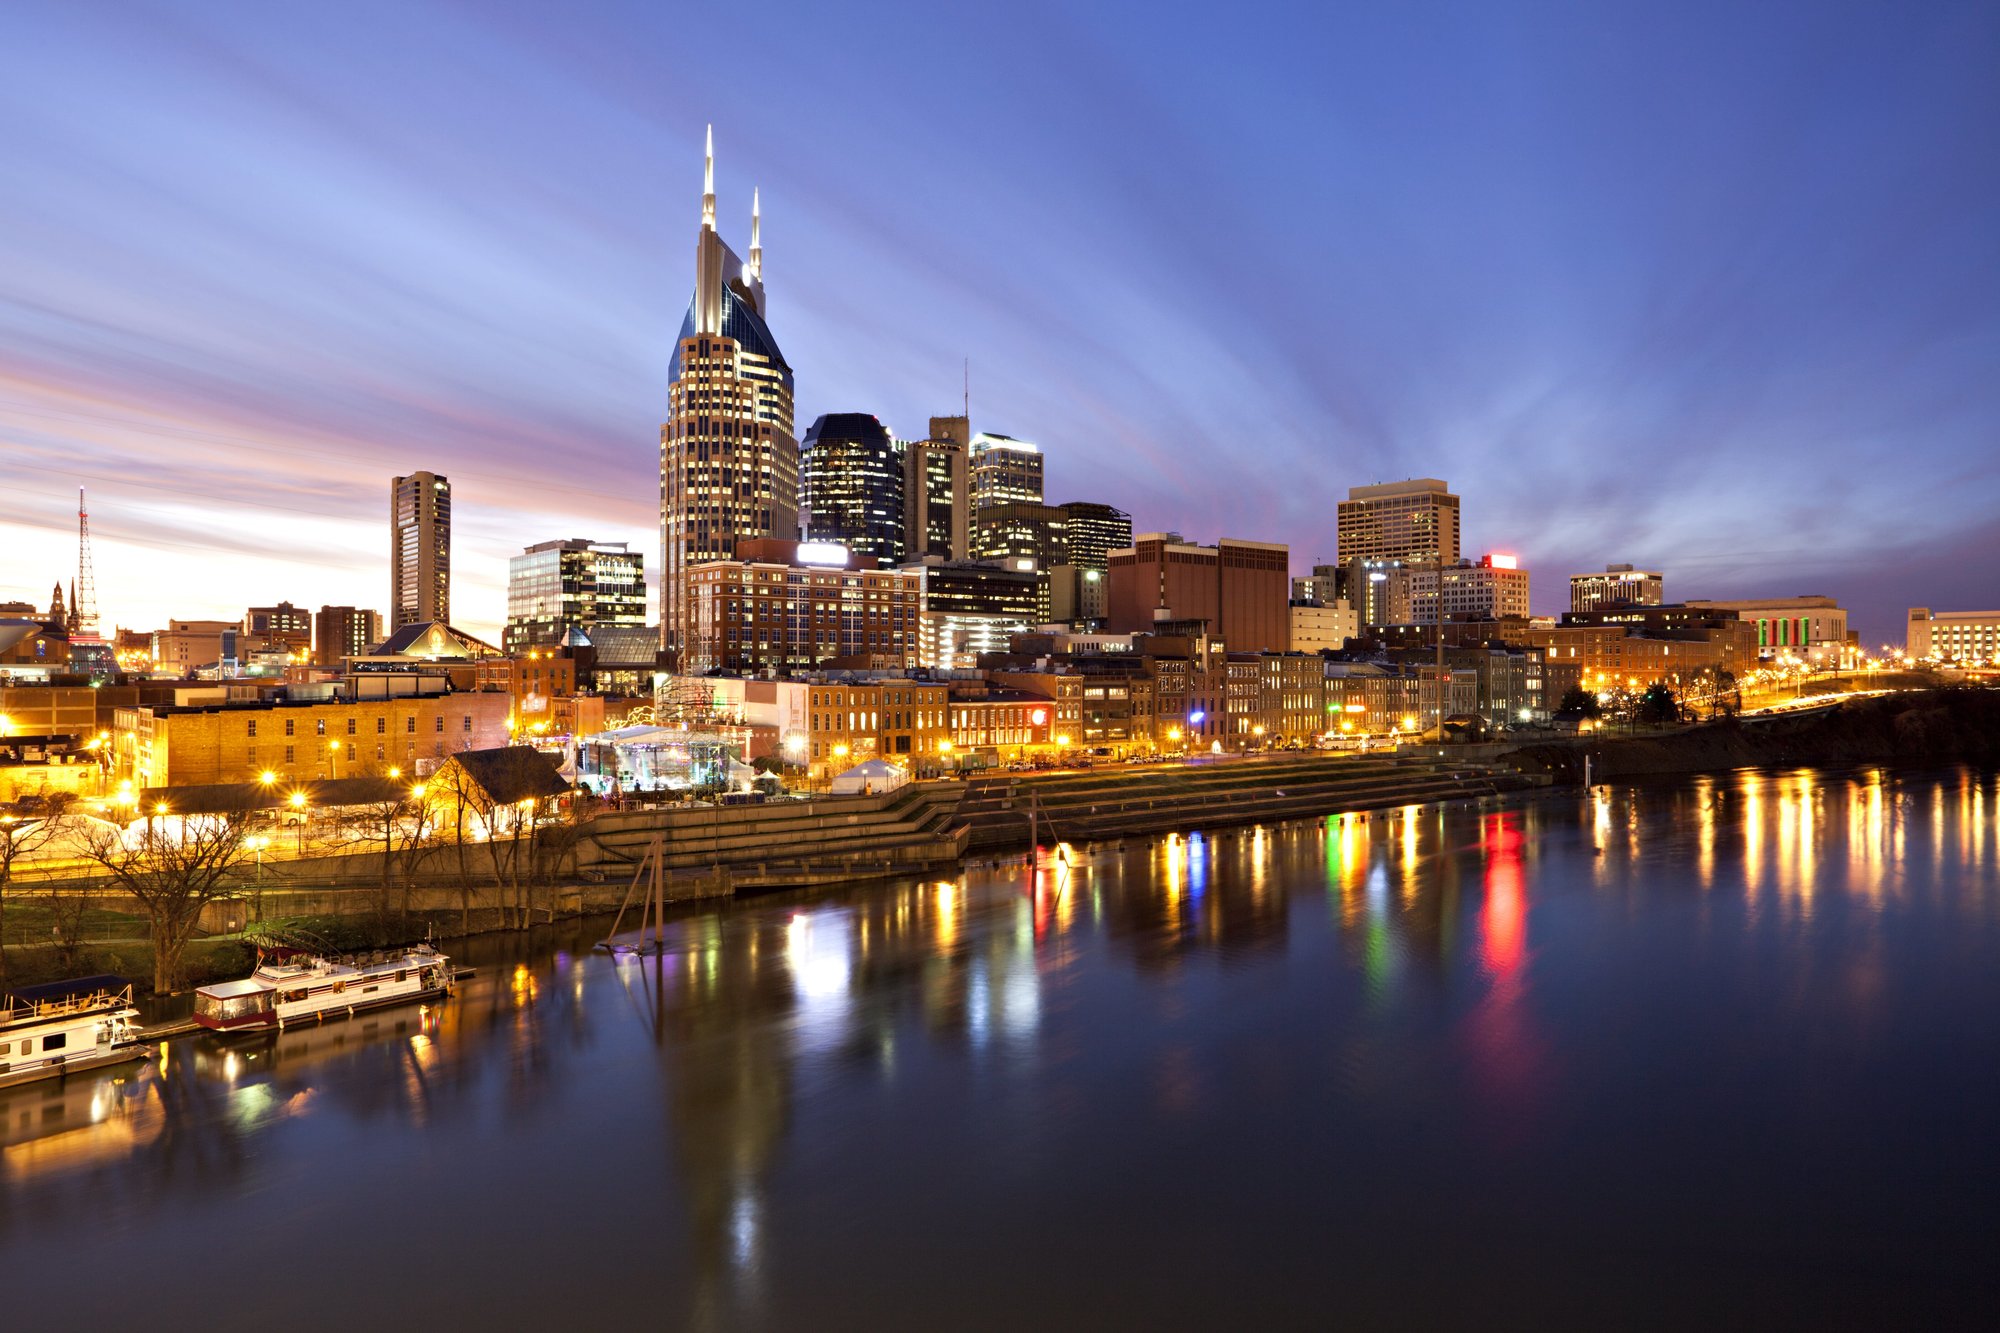 An image of the Nashville skyline at night.